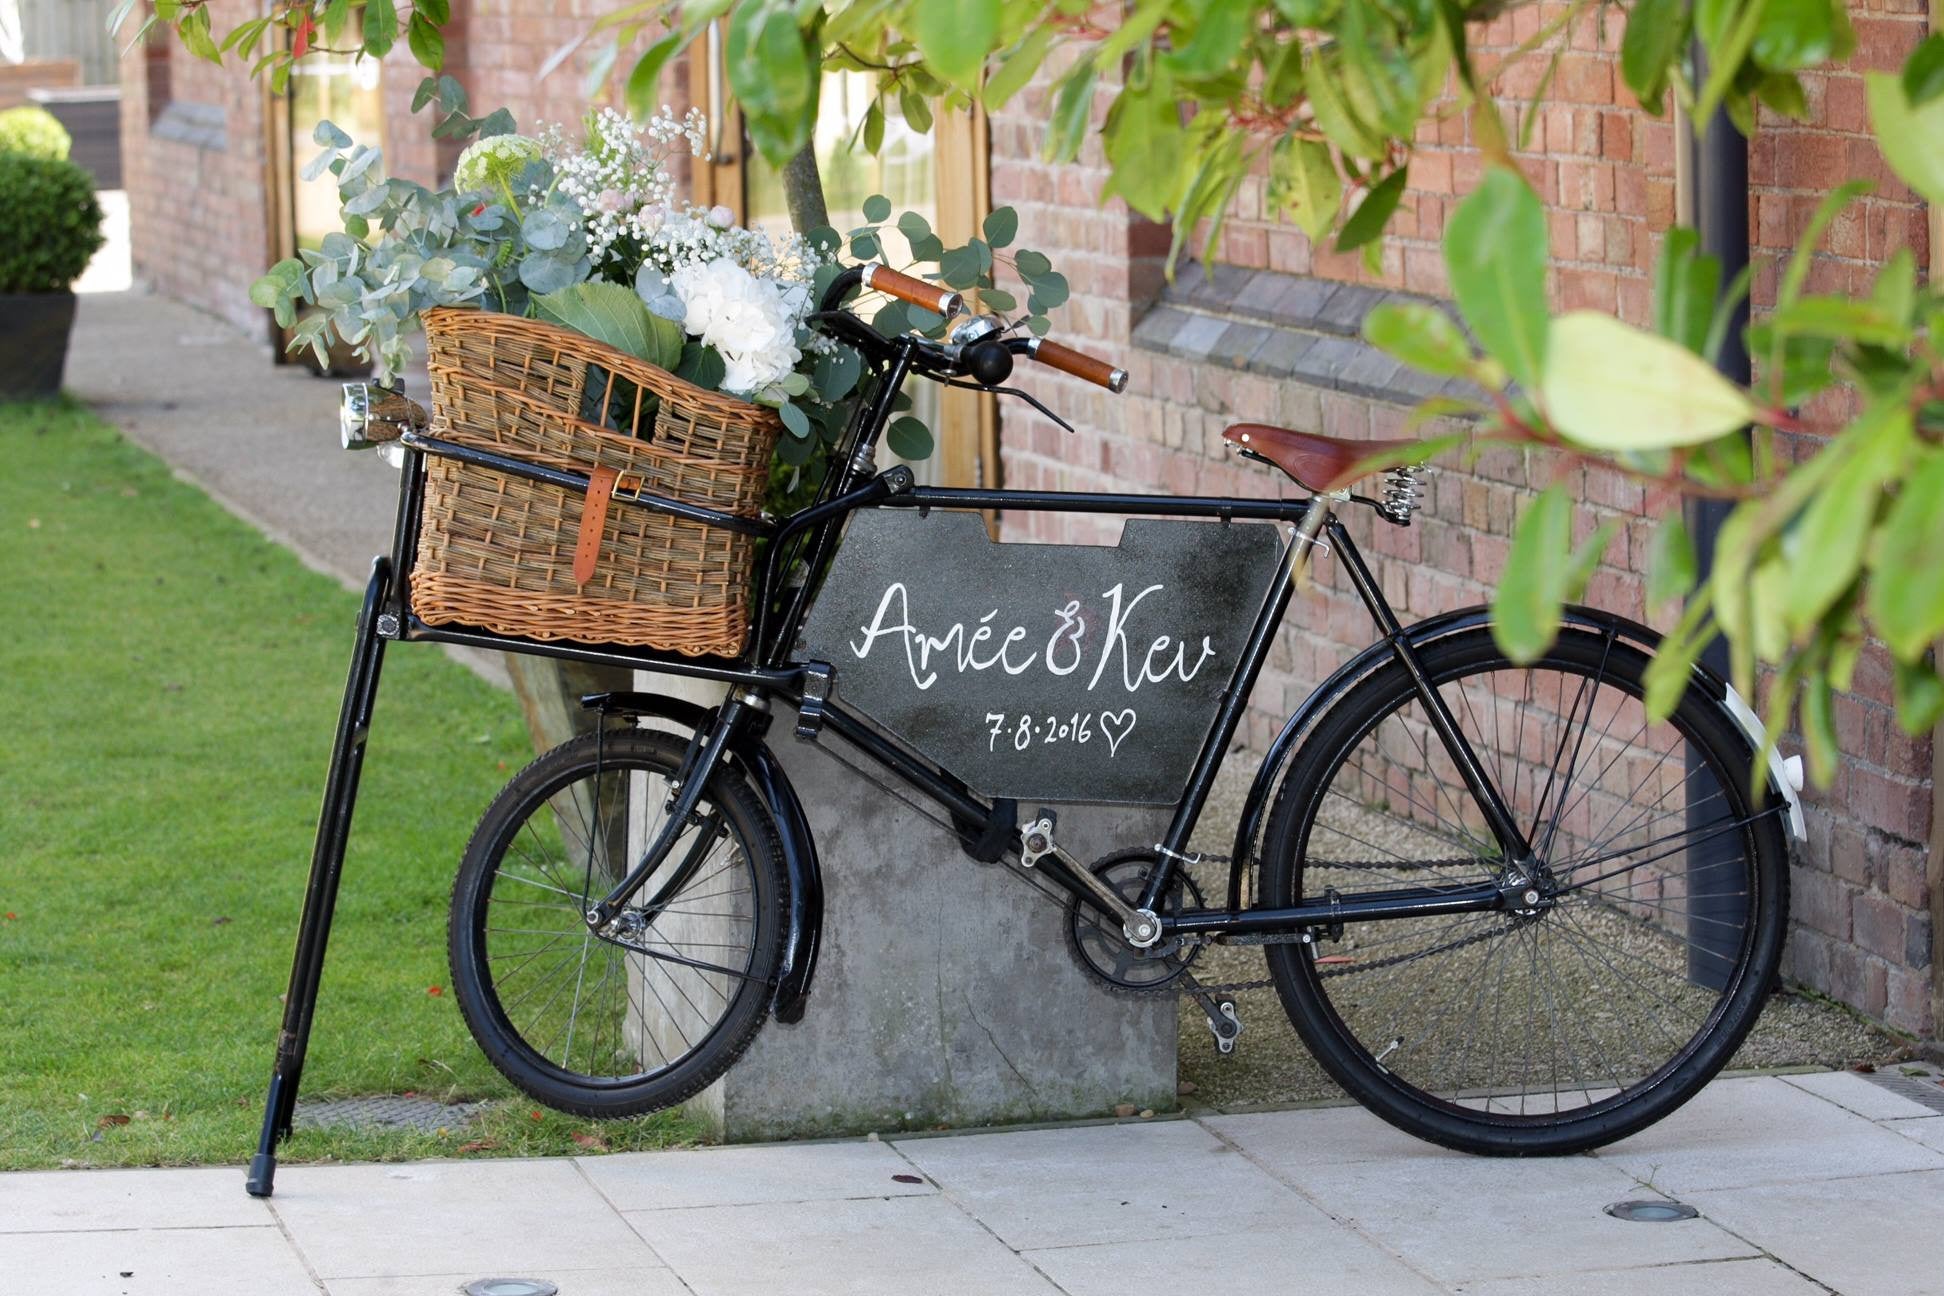 Vintage bike with wedding floral arrangement in shades of pink and cream in basket.